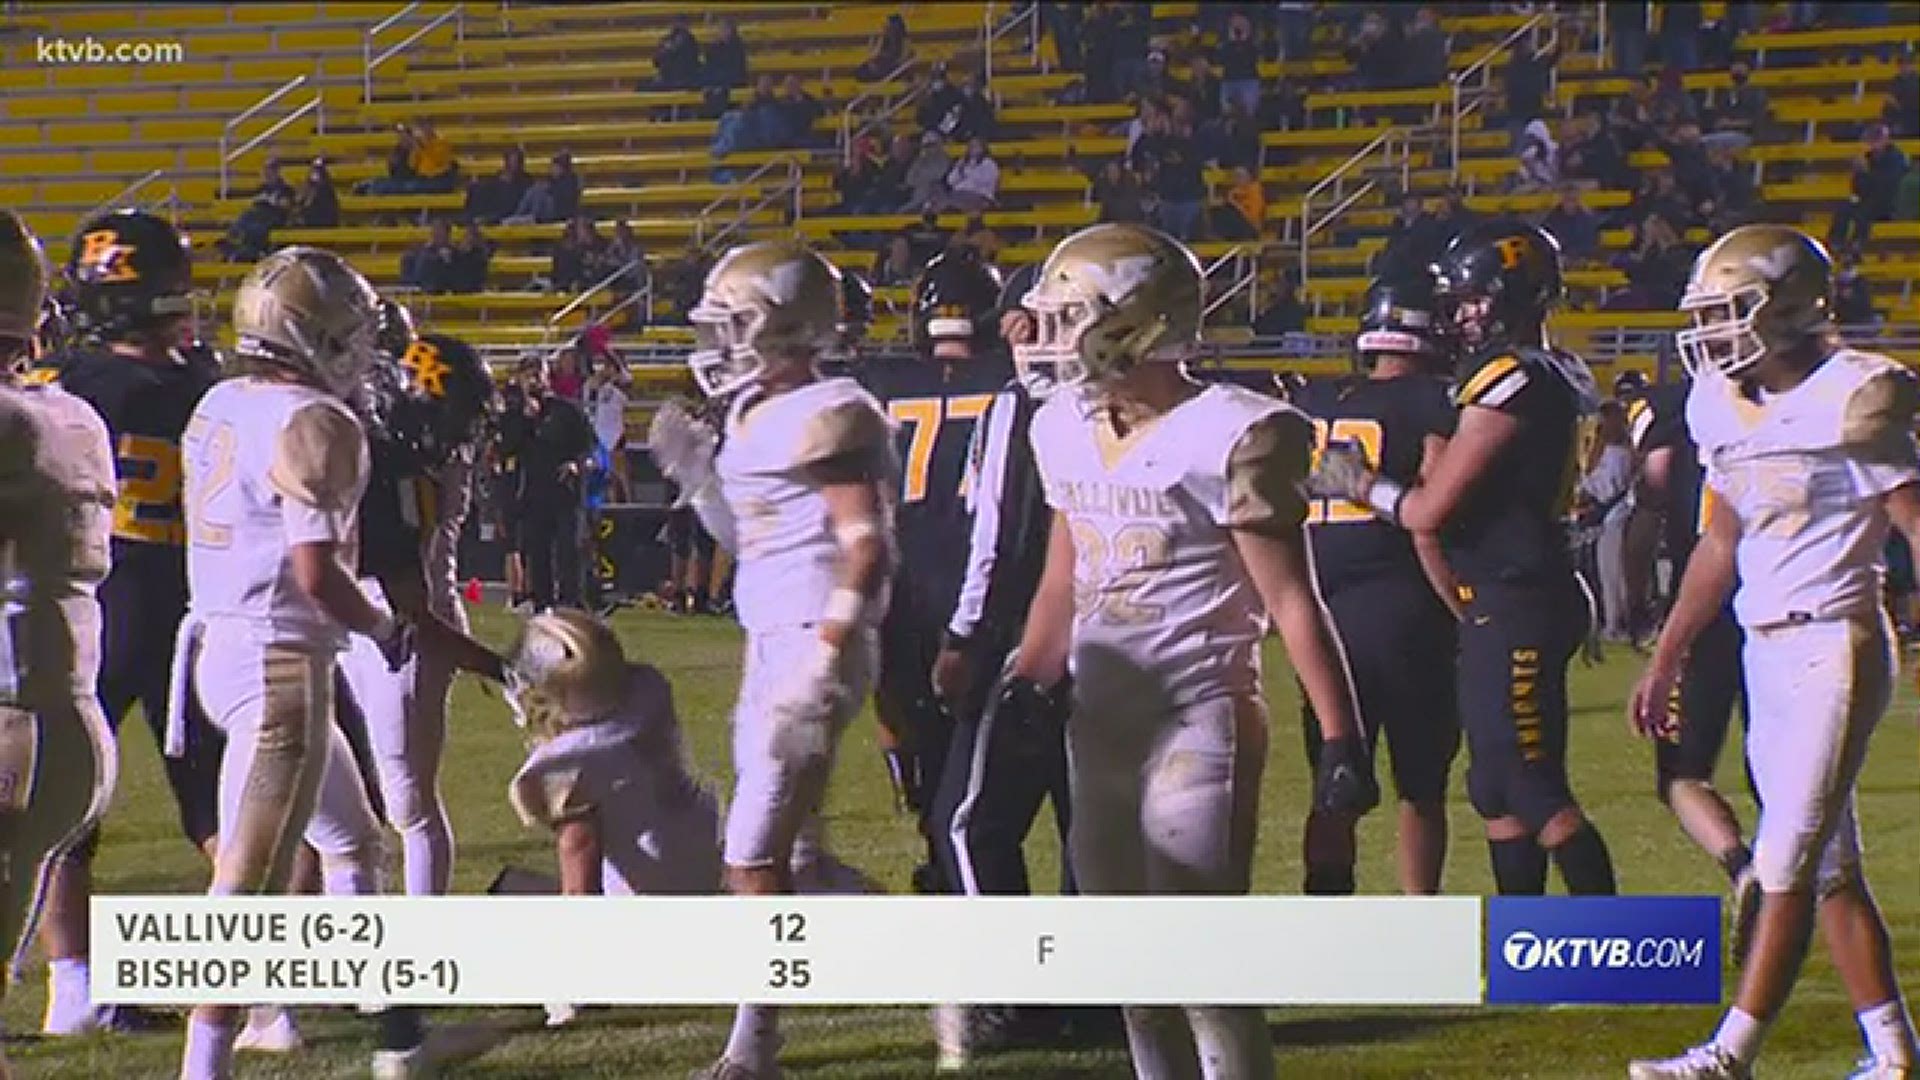 The Knights beat the one-loss Falcons in week eight to get back on top of the 5A SIC.